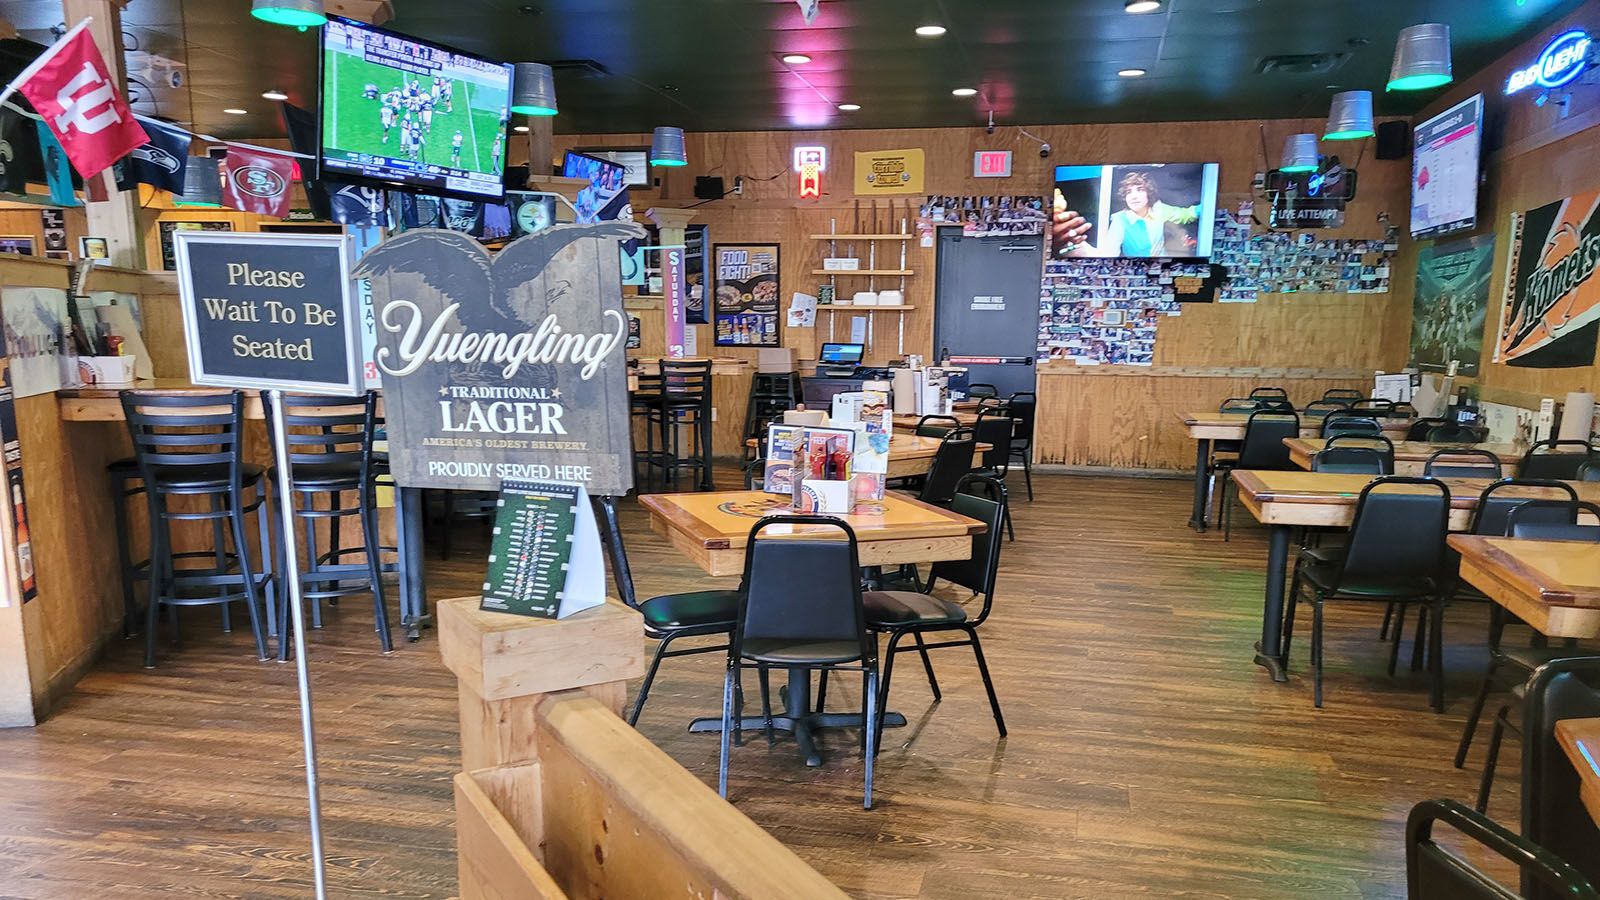 Wings Etc. offers sports environment without all the hoopla.